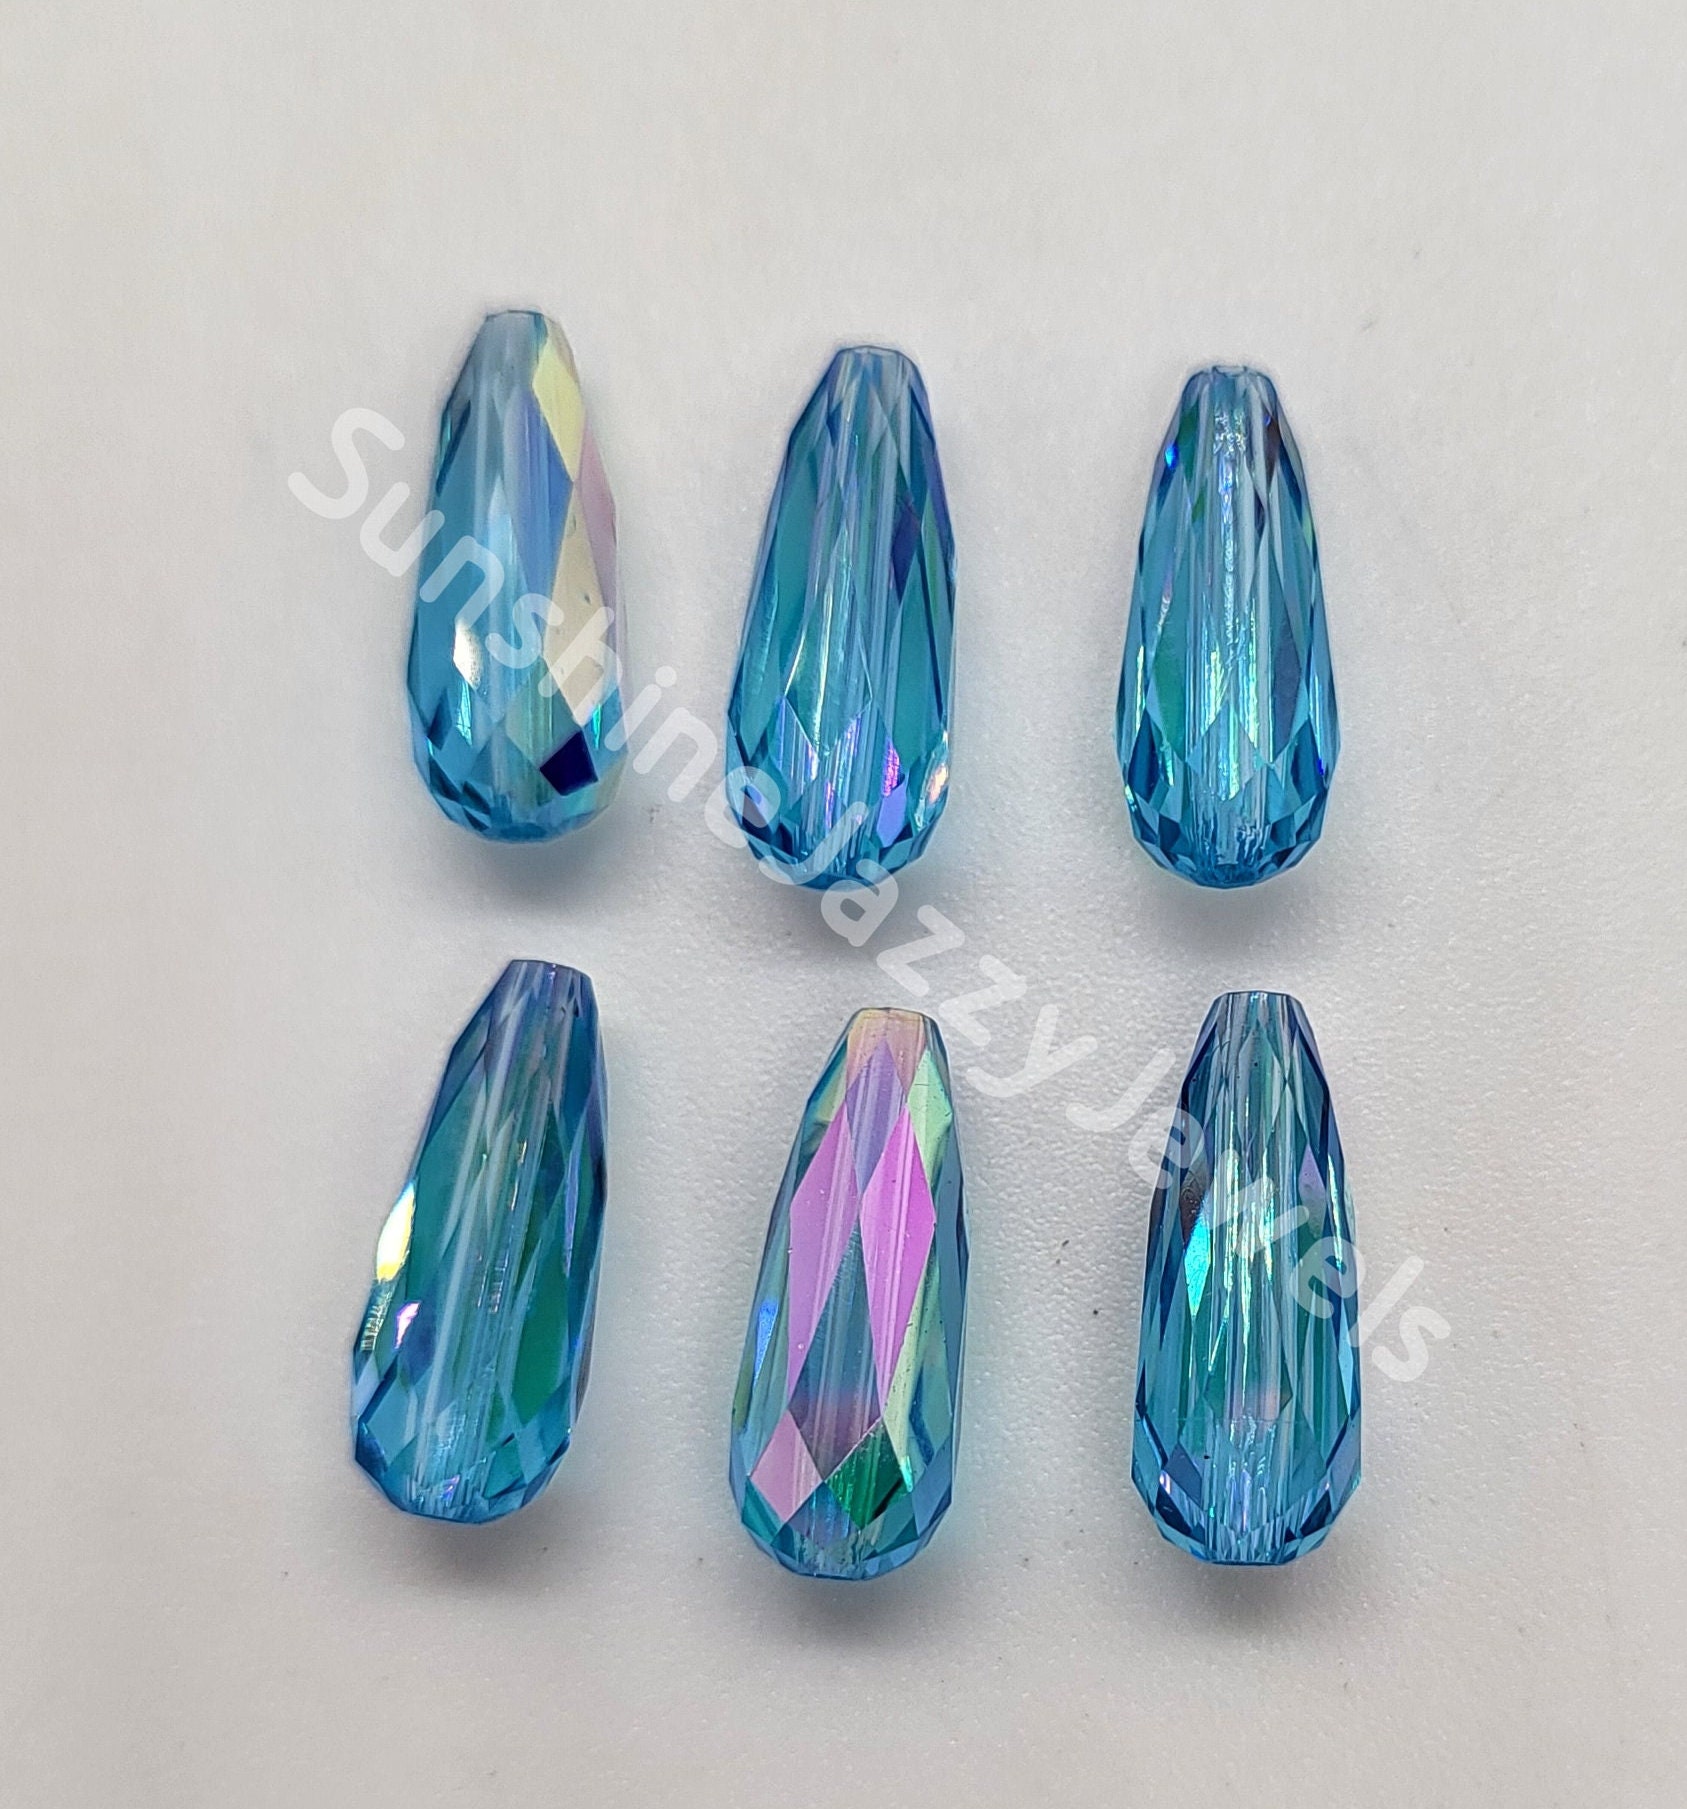 Ten large Czech glass teardrop beads - 9 x 18mm transparent aqua blue  pressed glass side drilled faceted drops six sides C0023